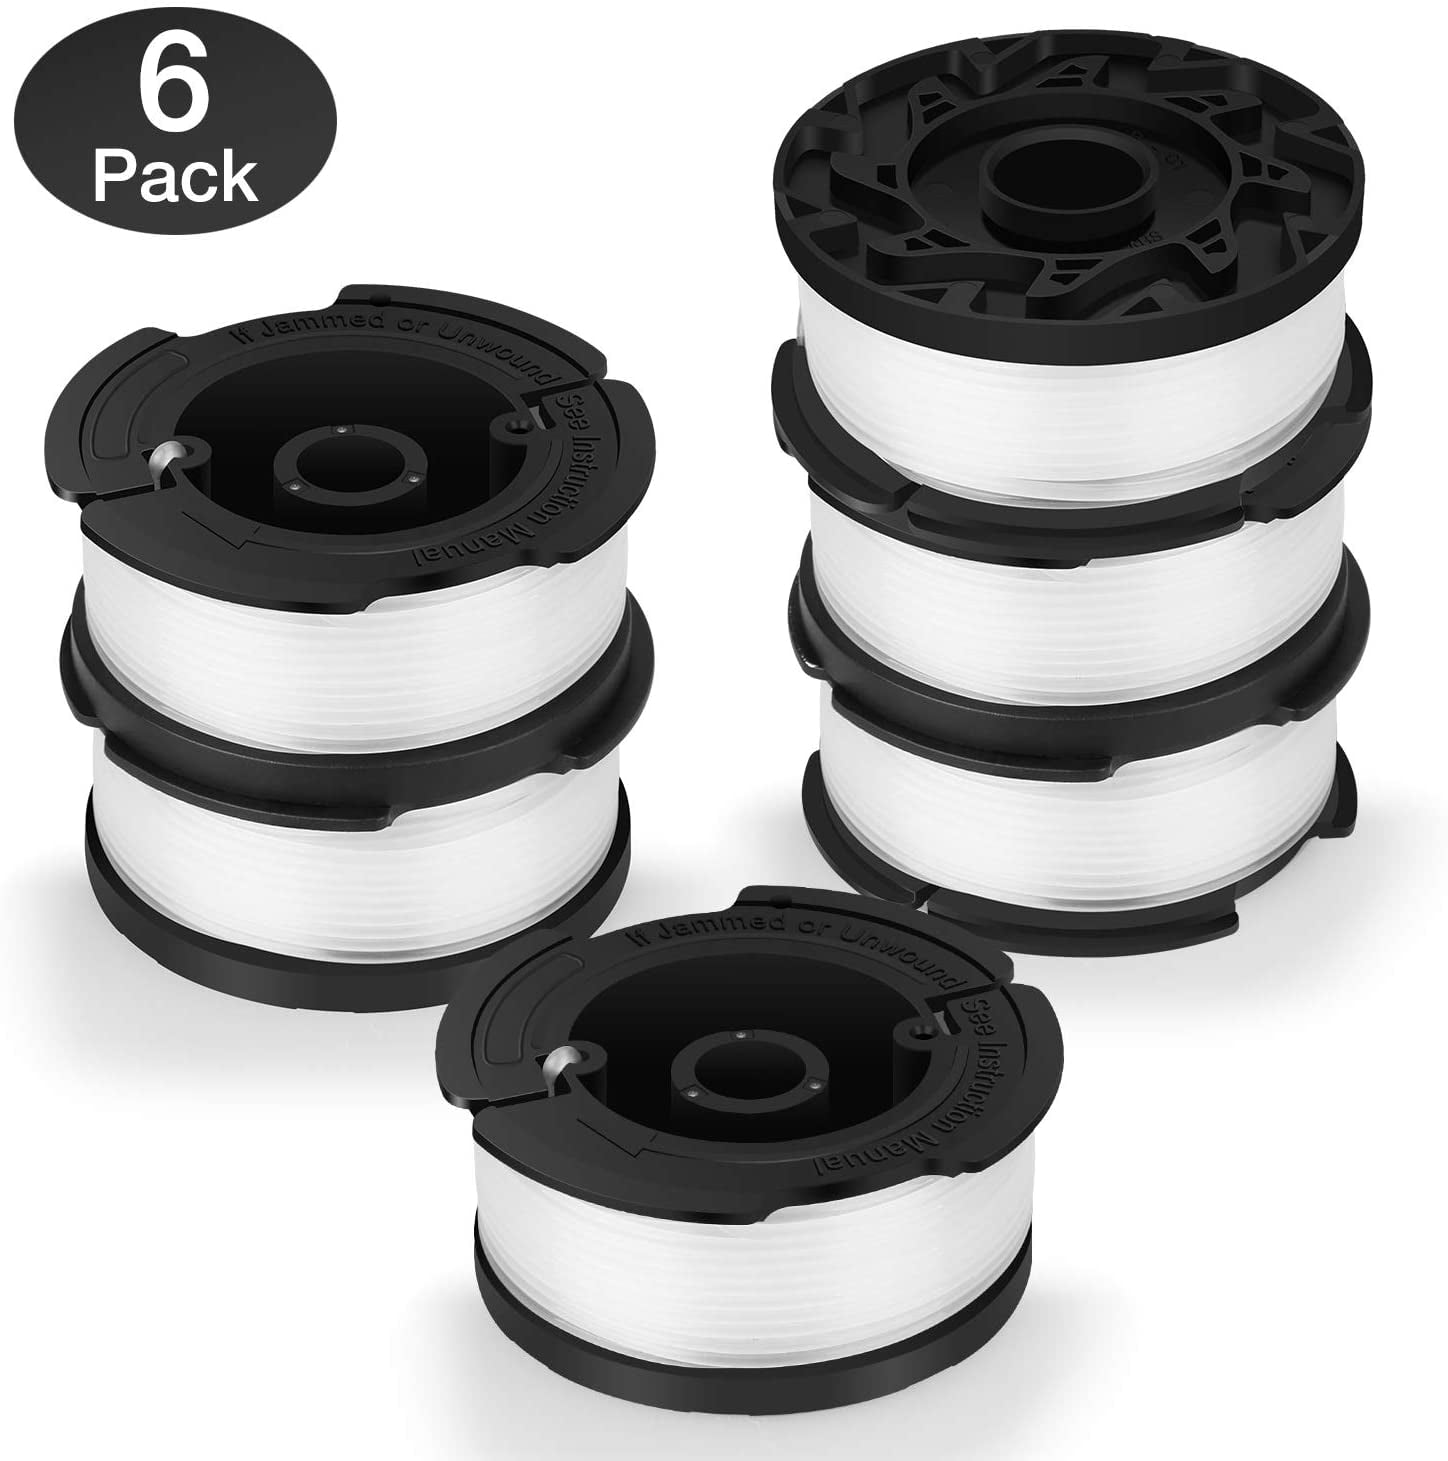 Yonice 6 Pack Line String Trimmer Replacement Spool,AF-100-3ZP 30ft 0.065 Autofeed String Trimmer Line Replacement Spool 